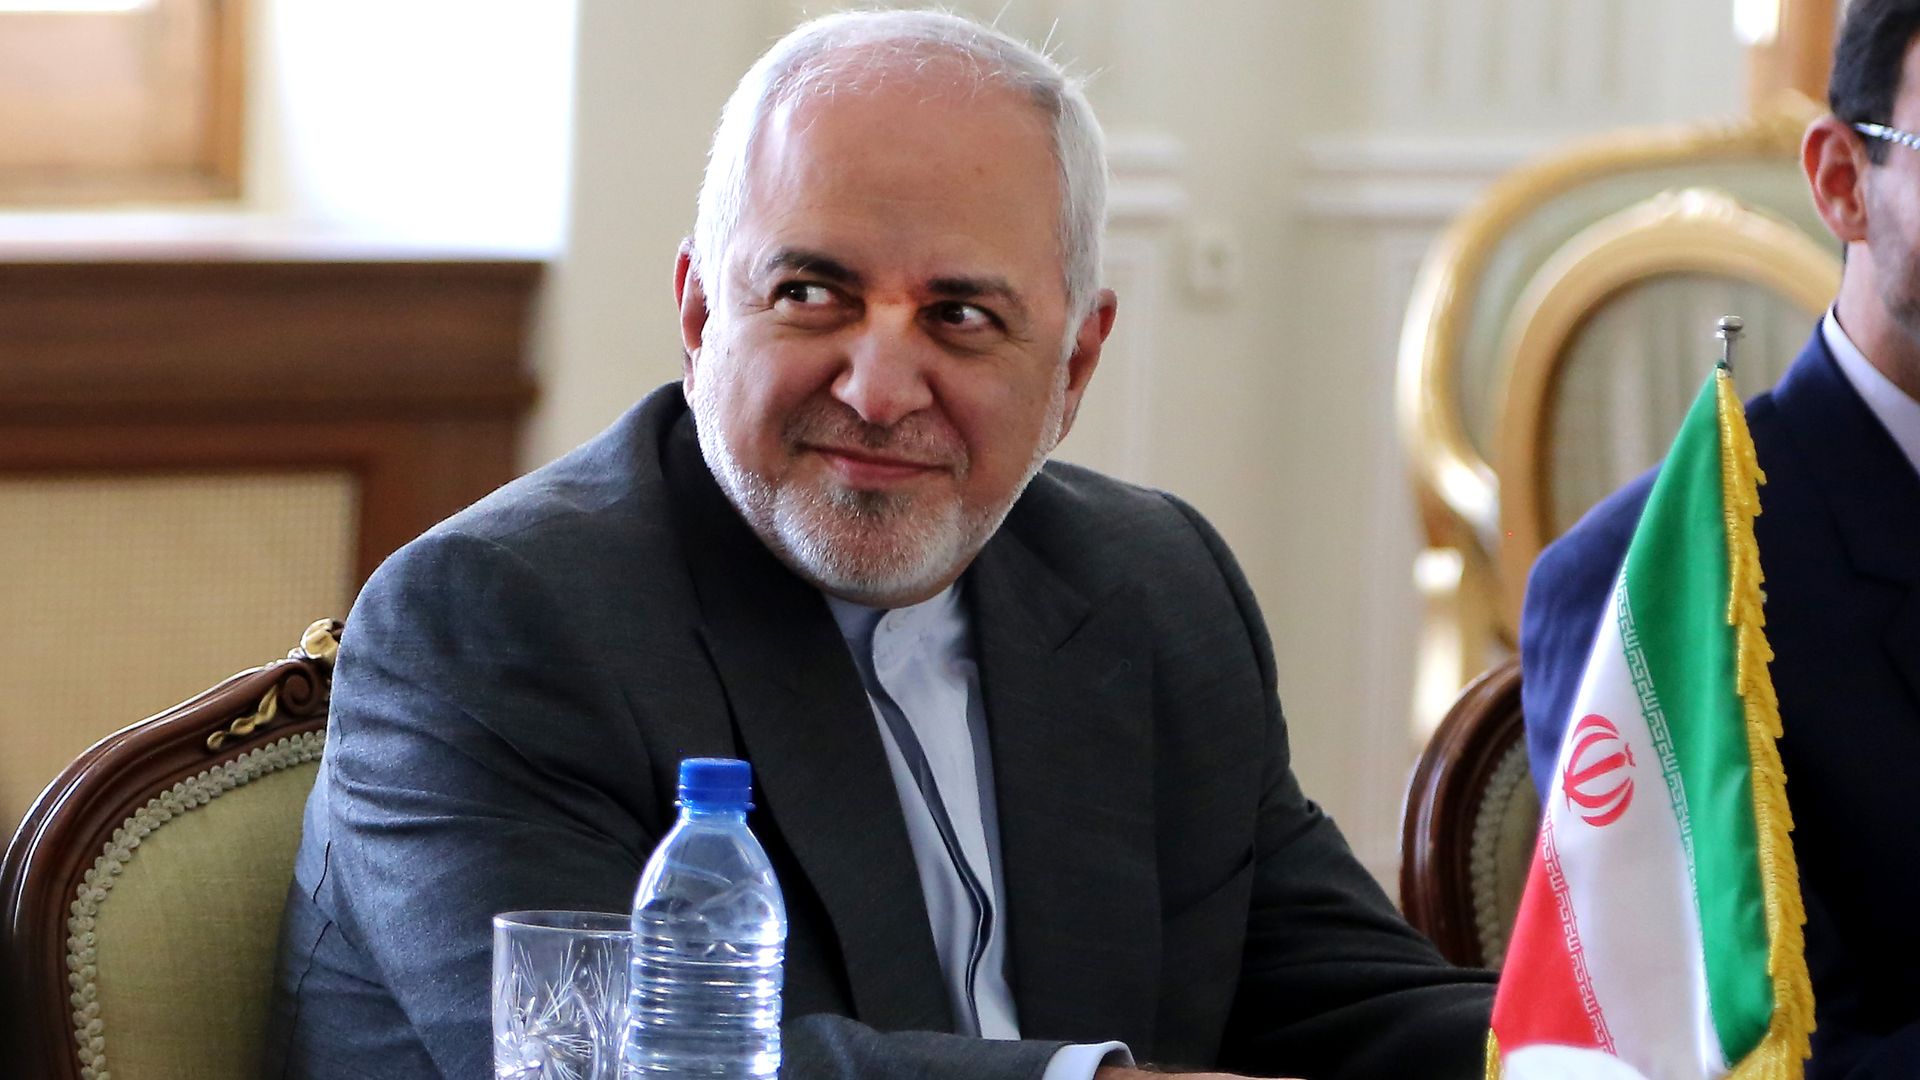 Mohammad Zarif seated at a conference table